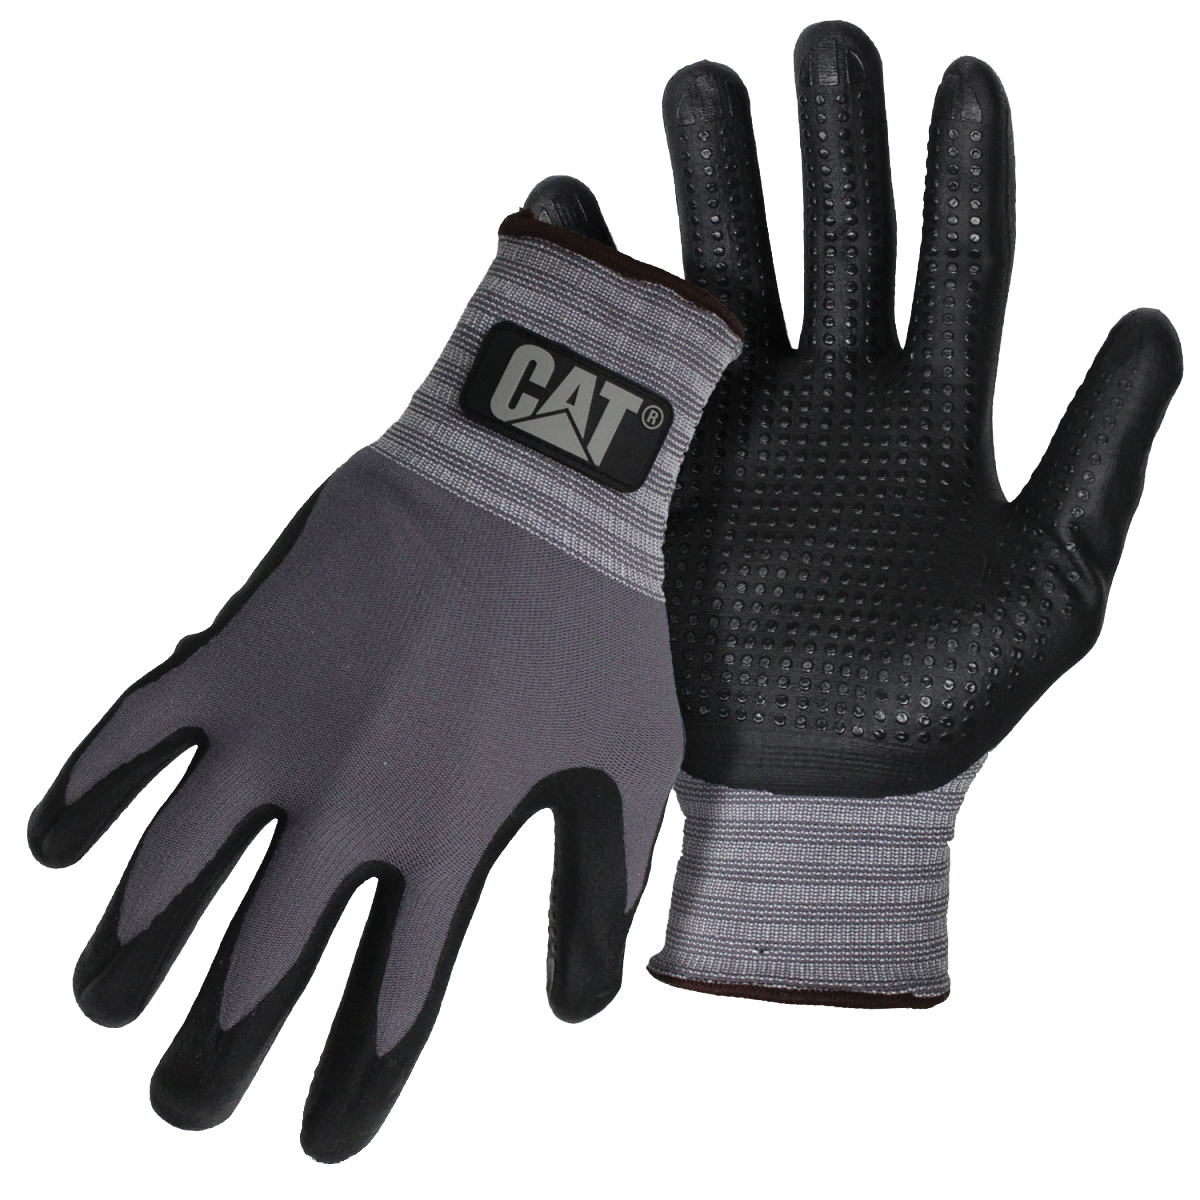 CAT CAT017419M Work Gloves, M, Extended Knit Wrist Cuff, Nitrile/Nylon, Gray